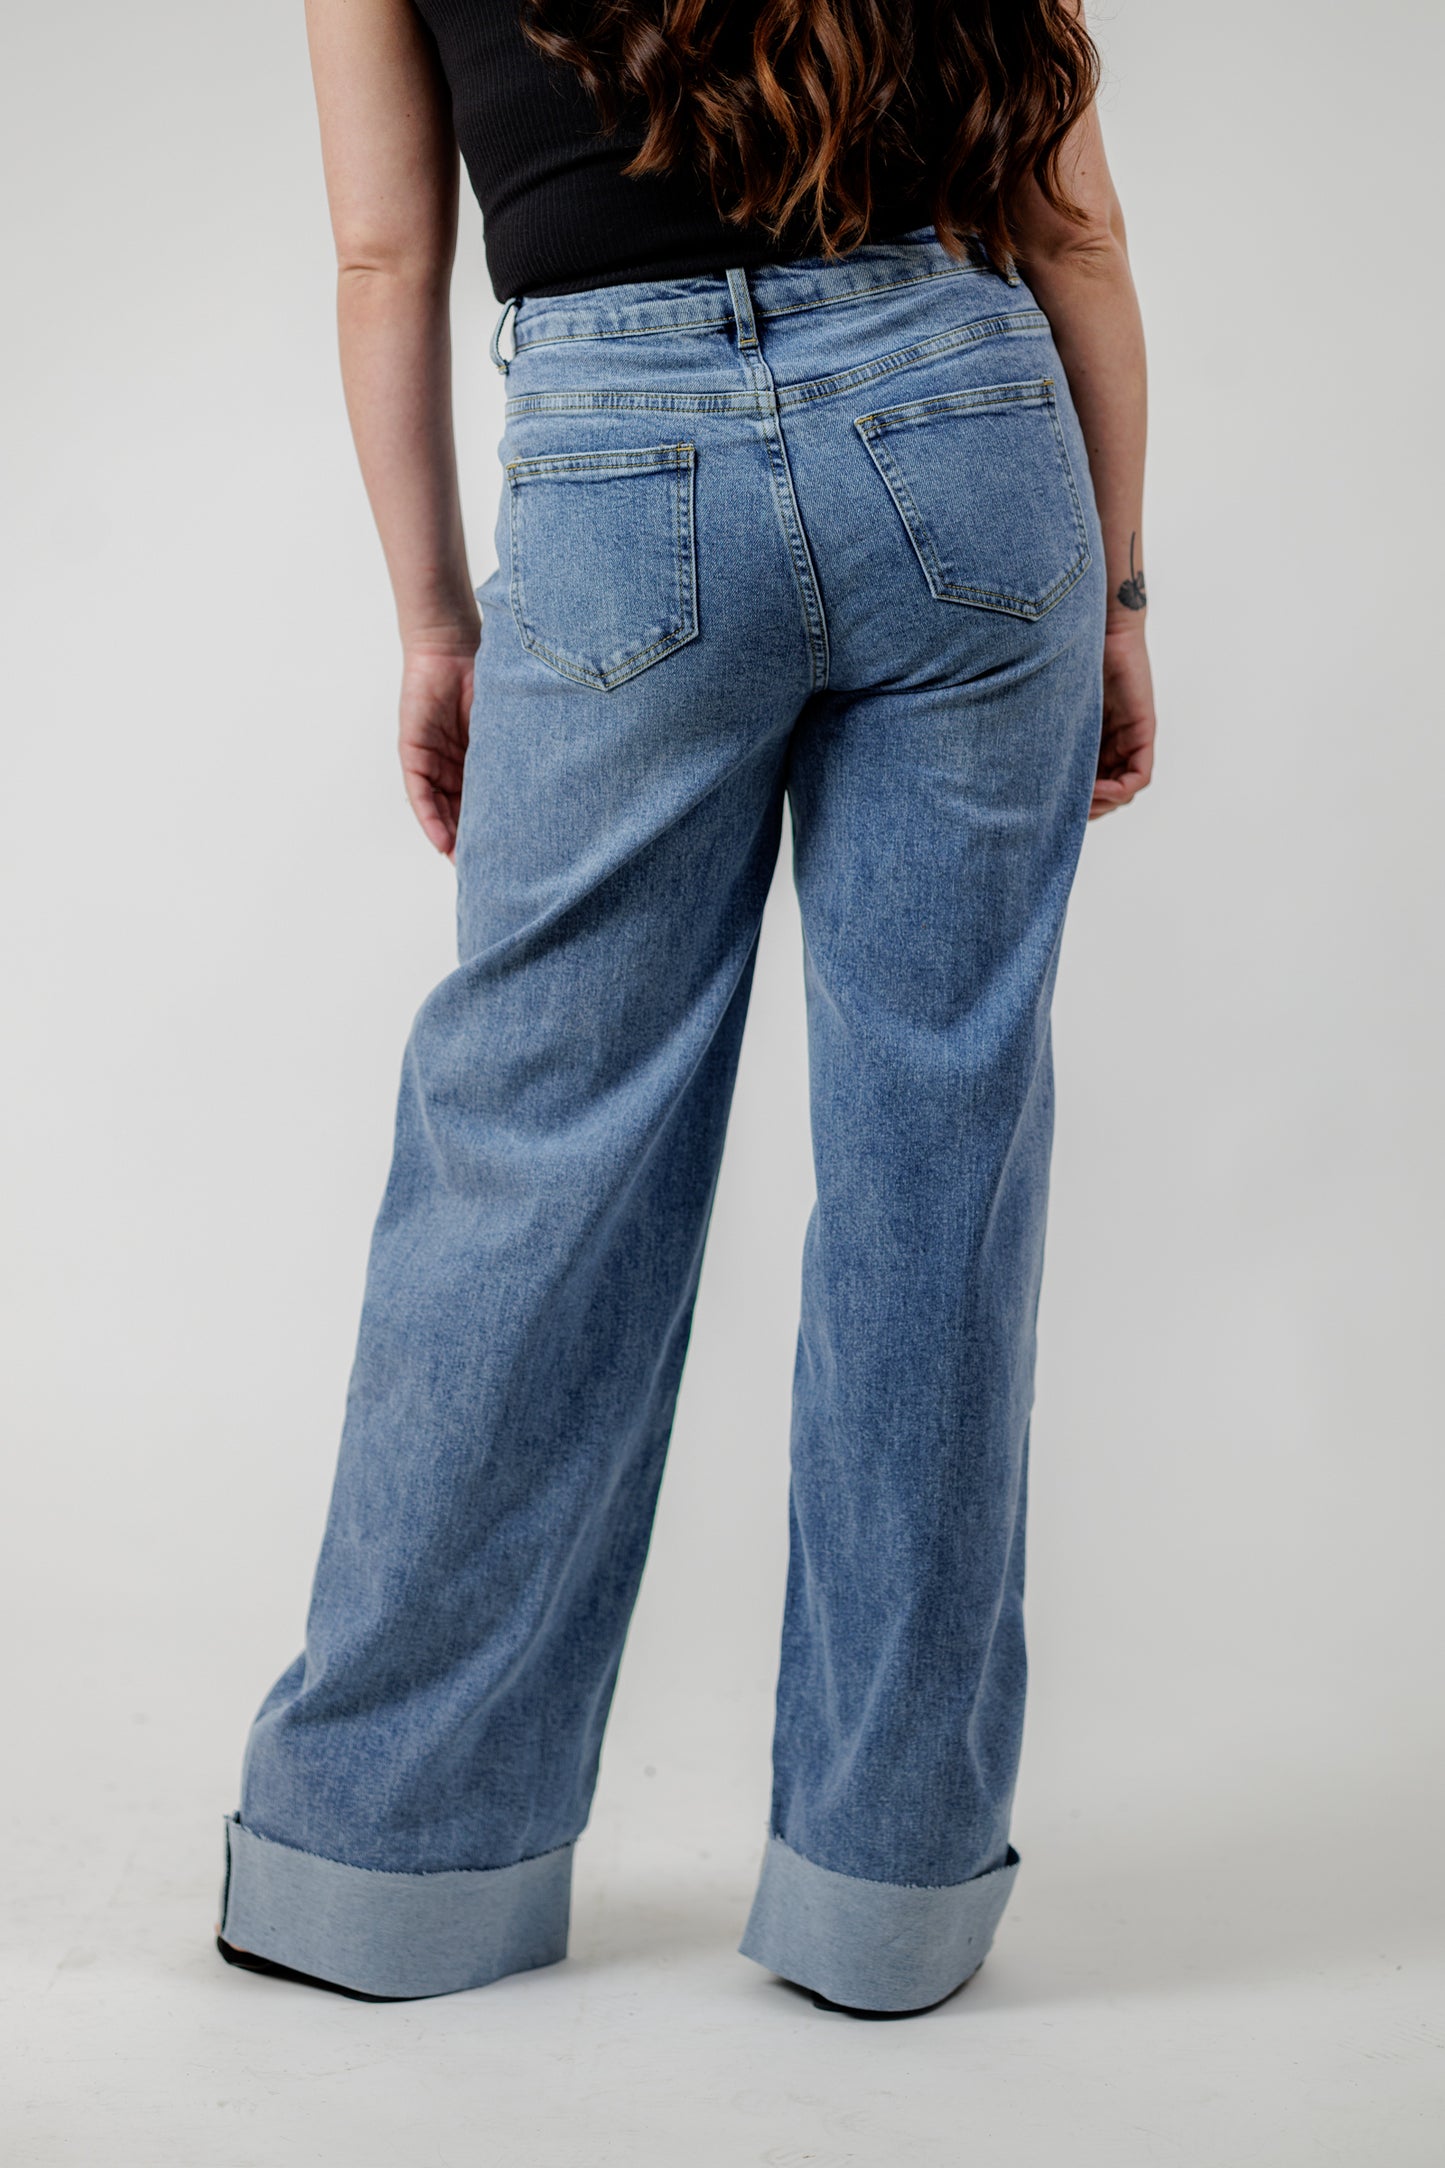 The Right Fit HR Straight Leg Jeans